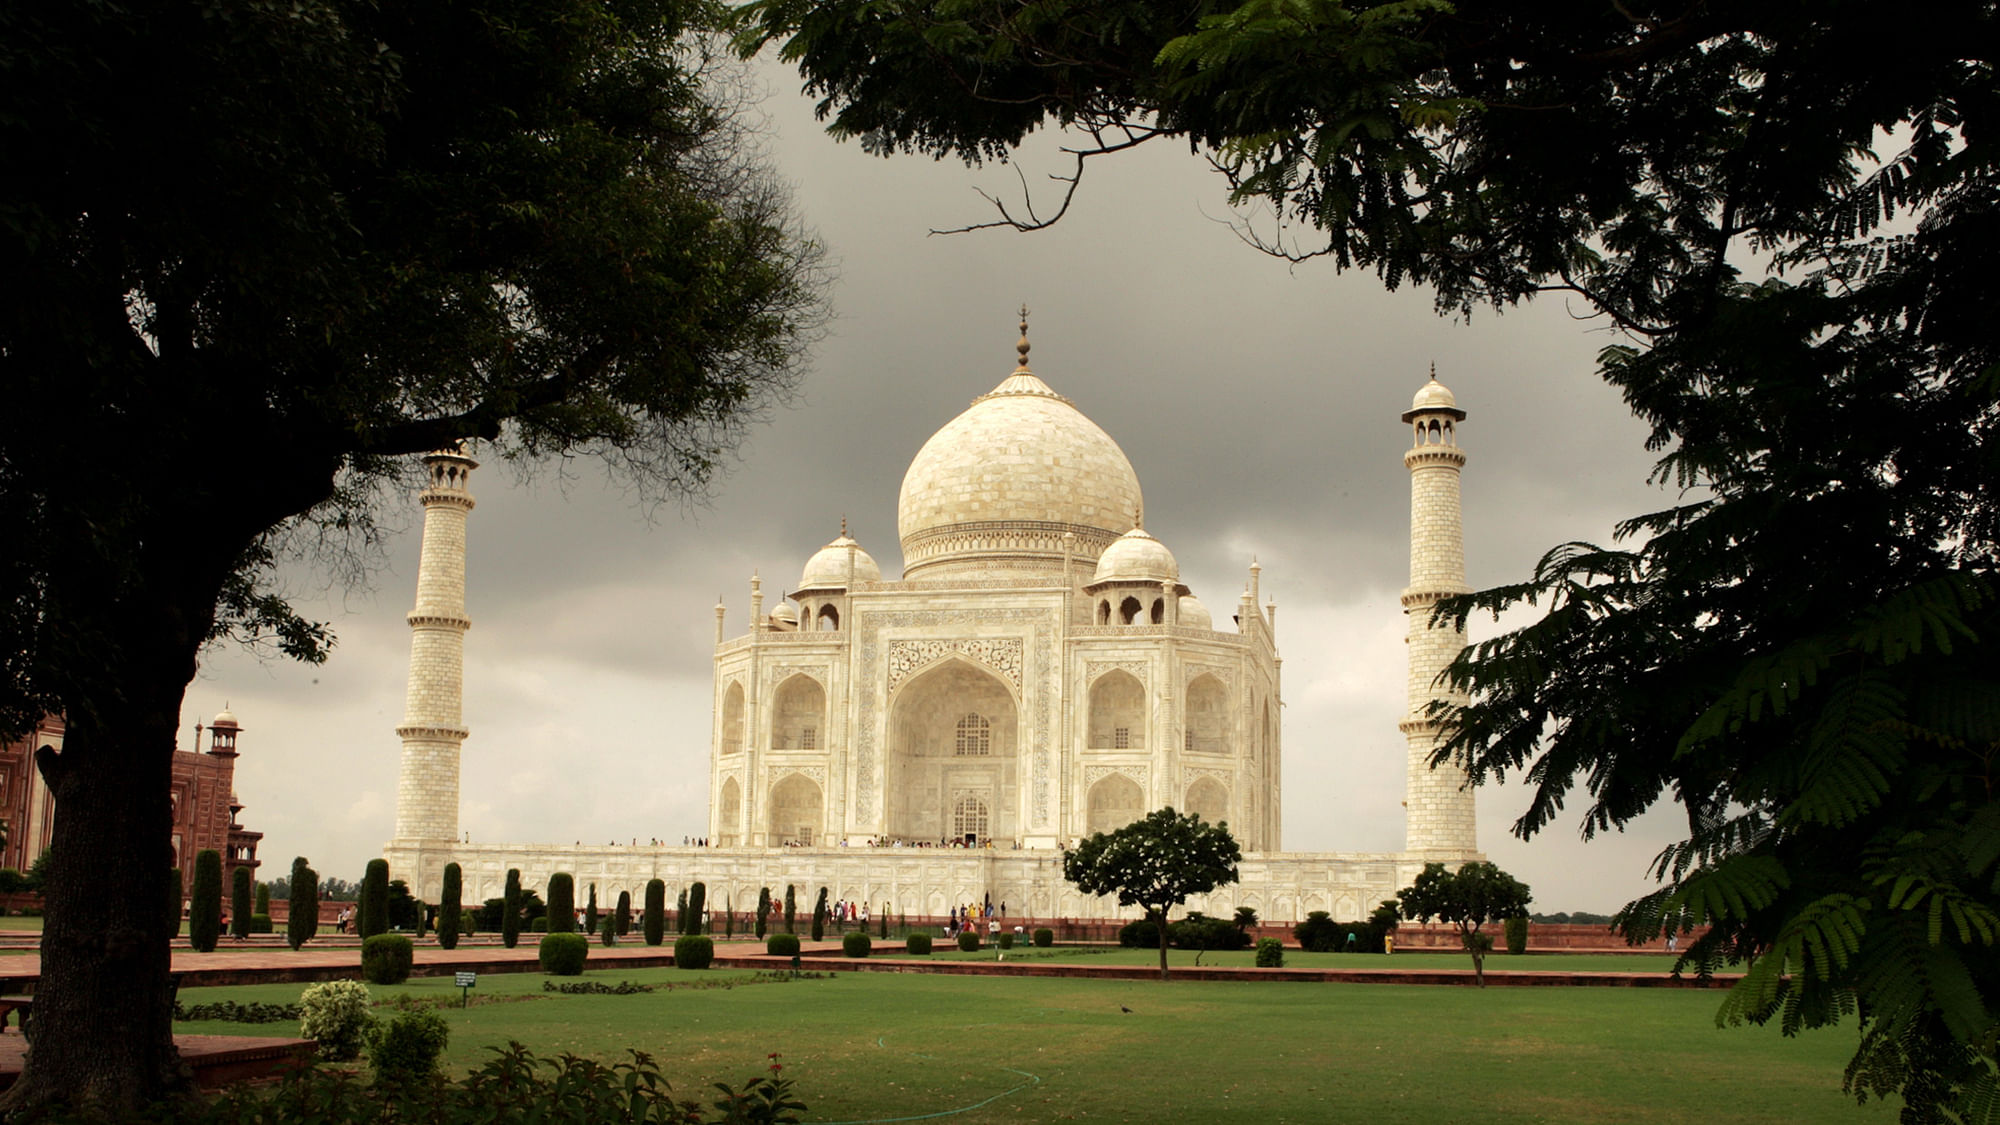 Agra. Image used for representational purposes.